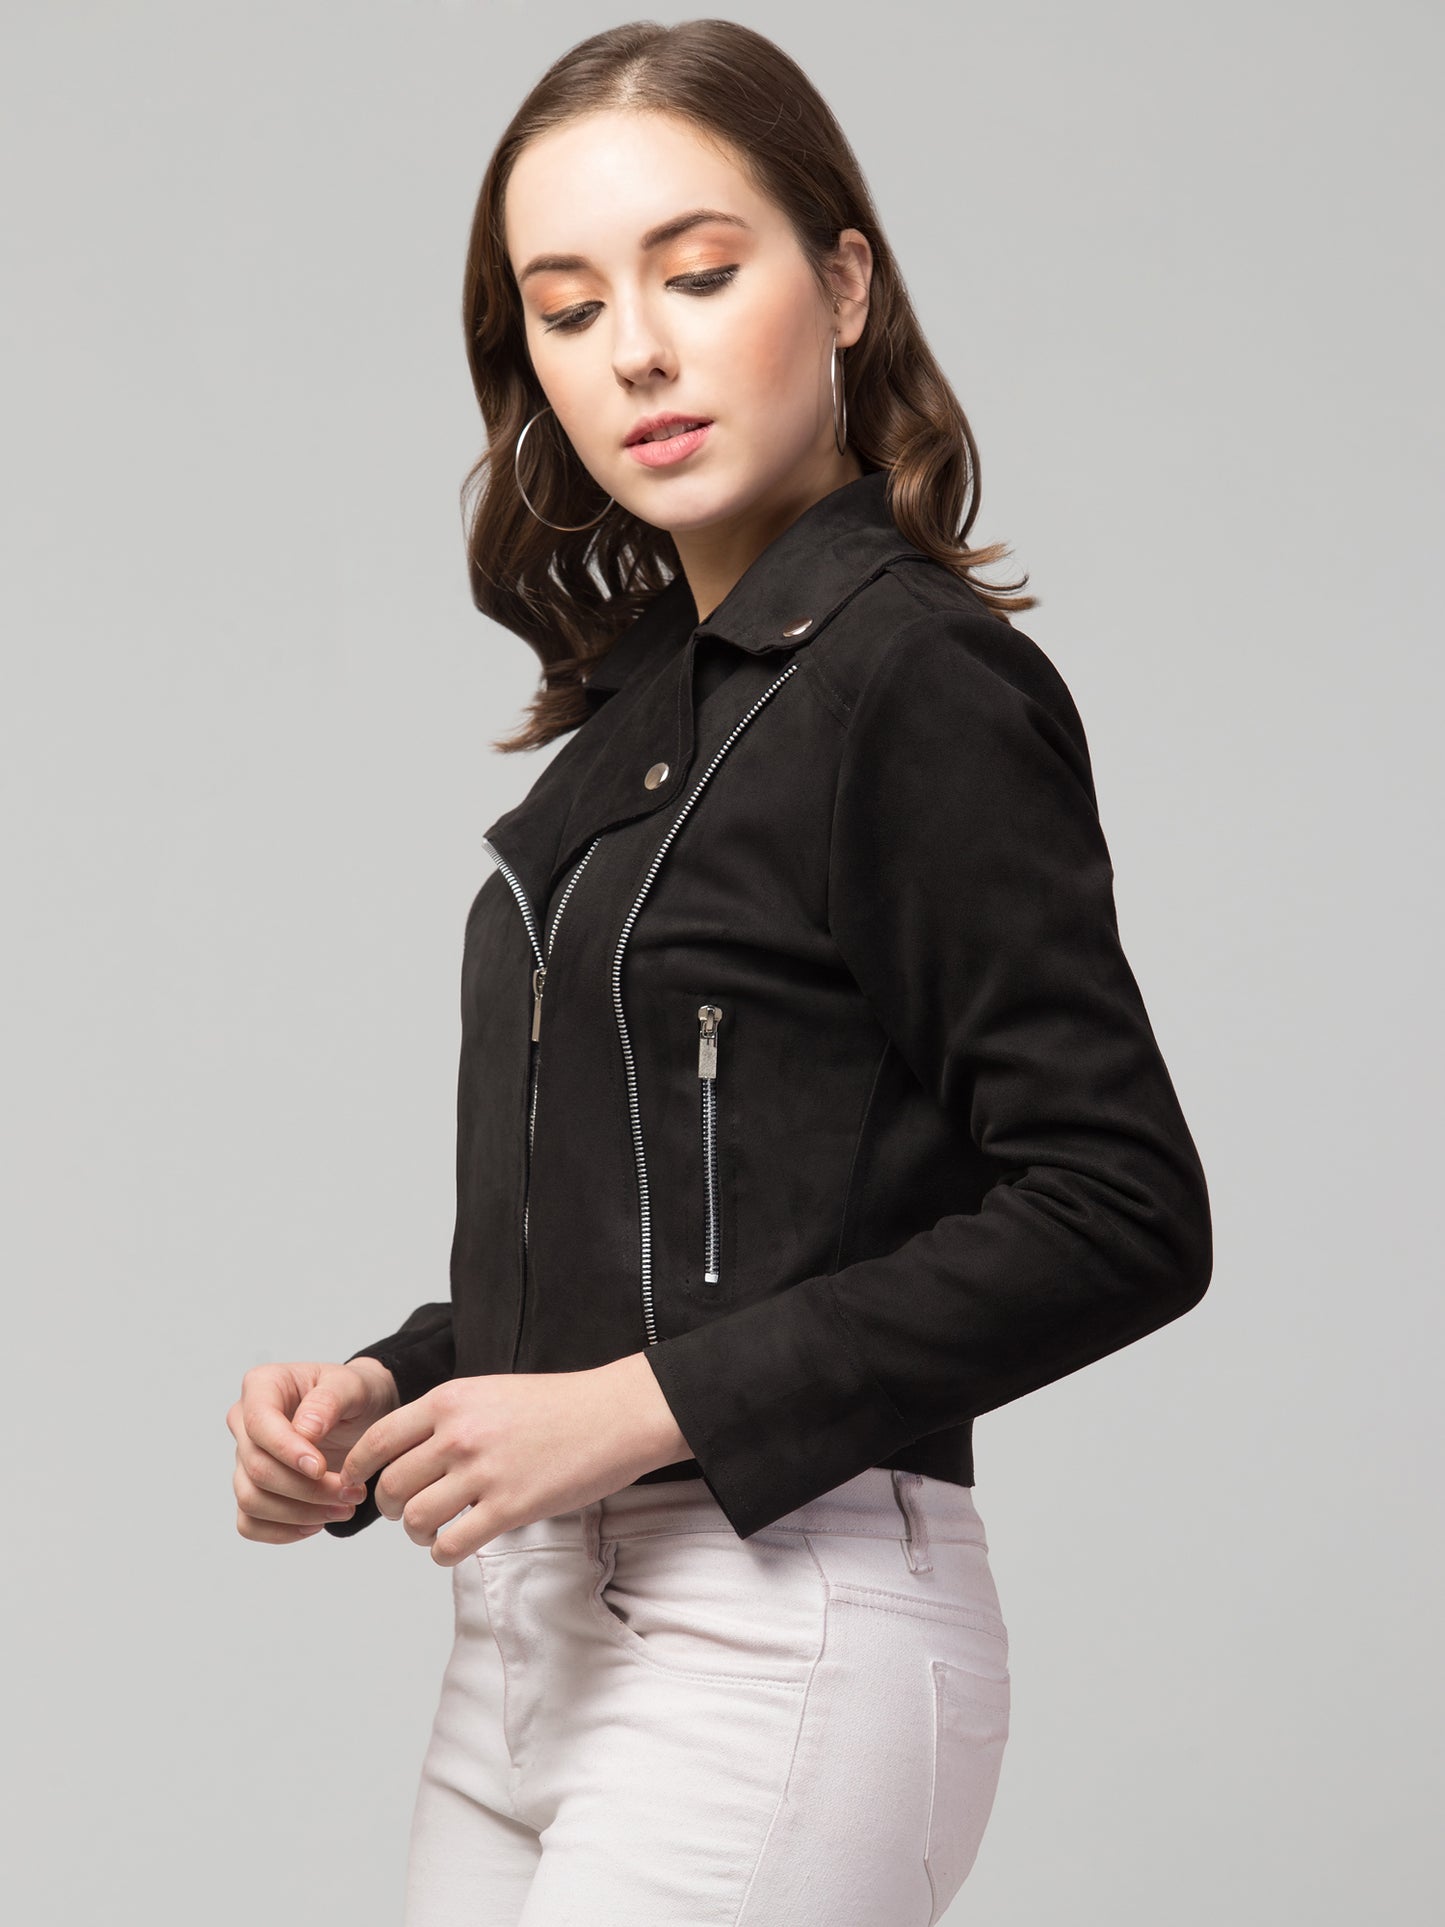 Suede Fabric Girls Jacket with Soft Lining & Fancy Zips